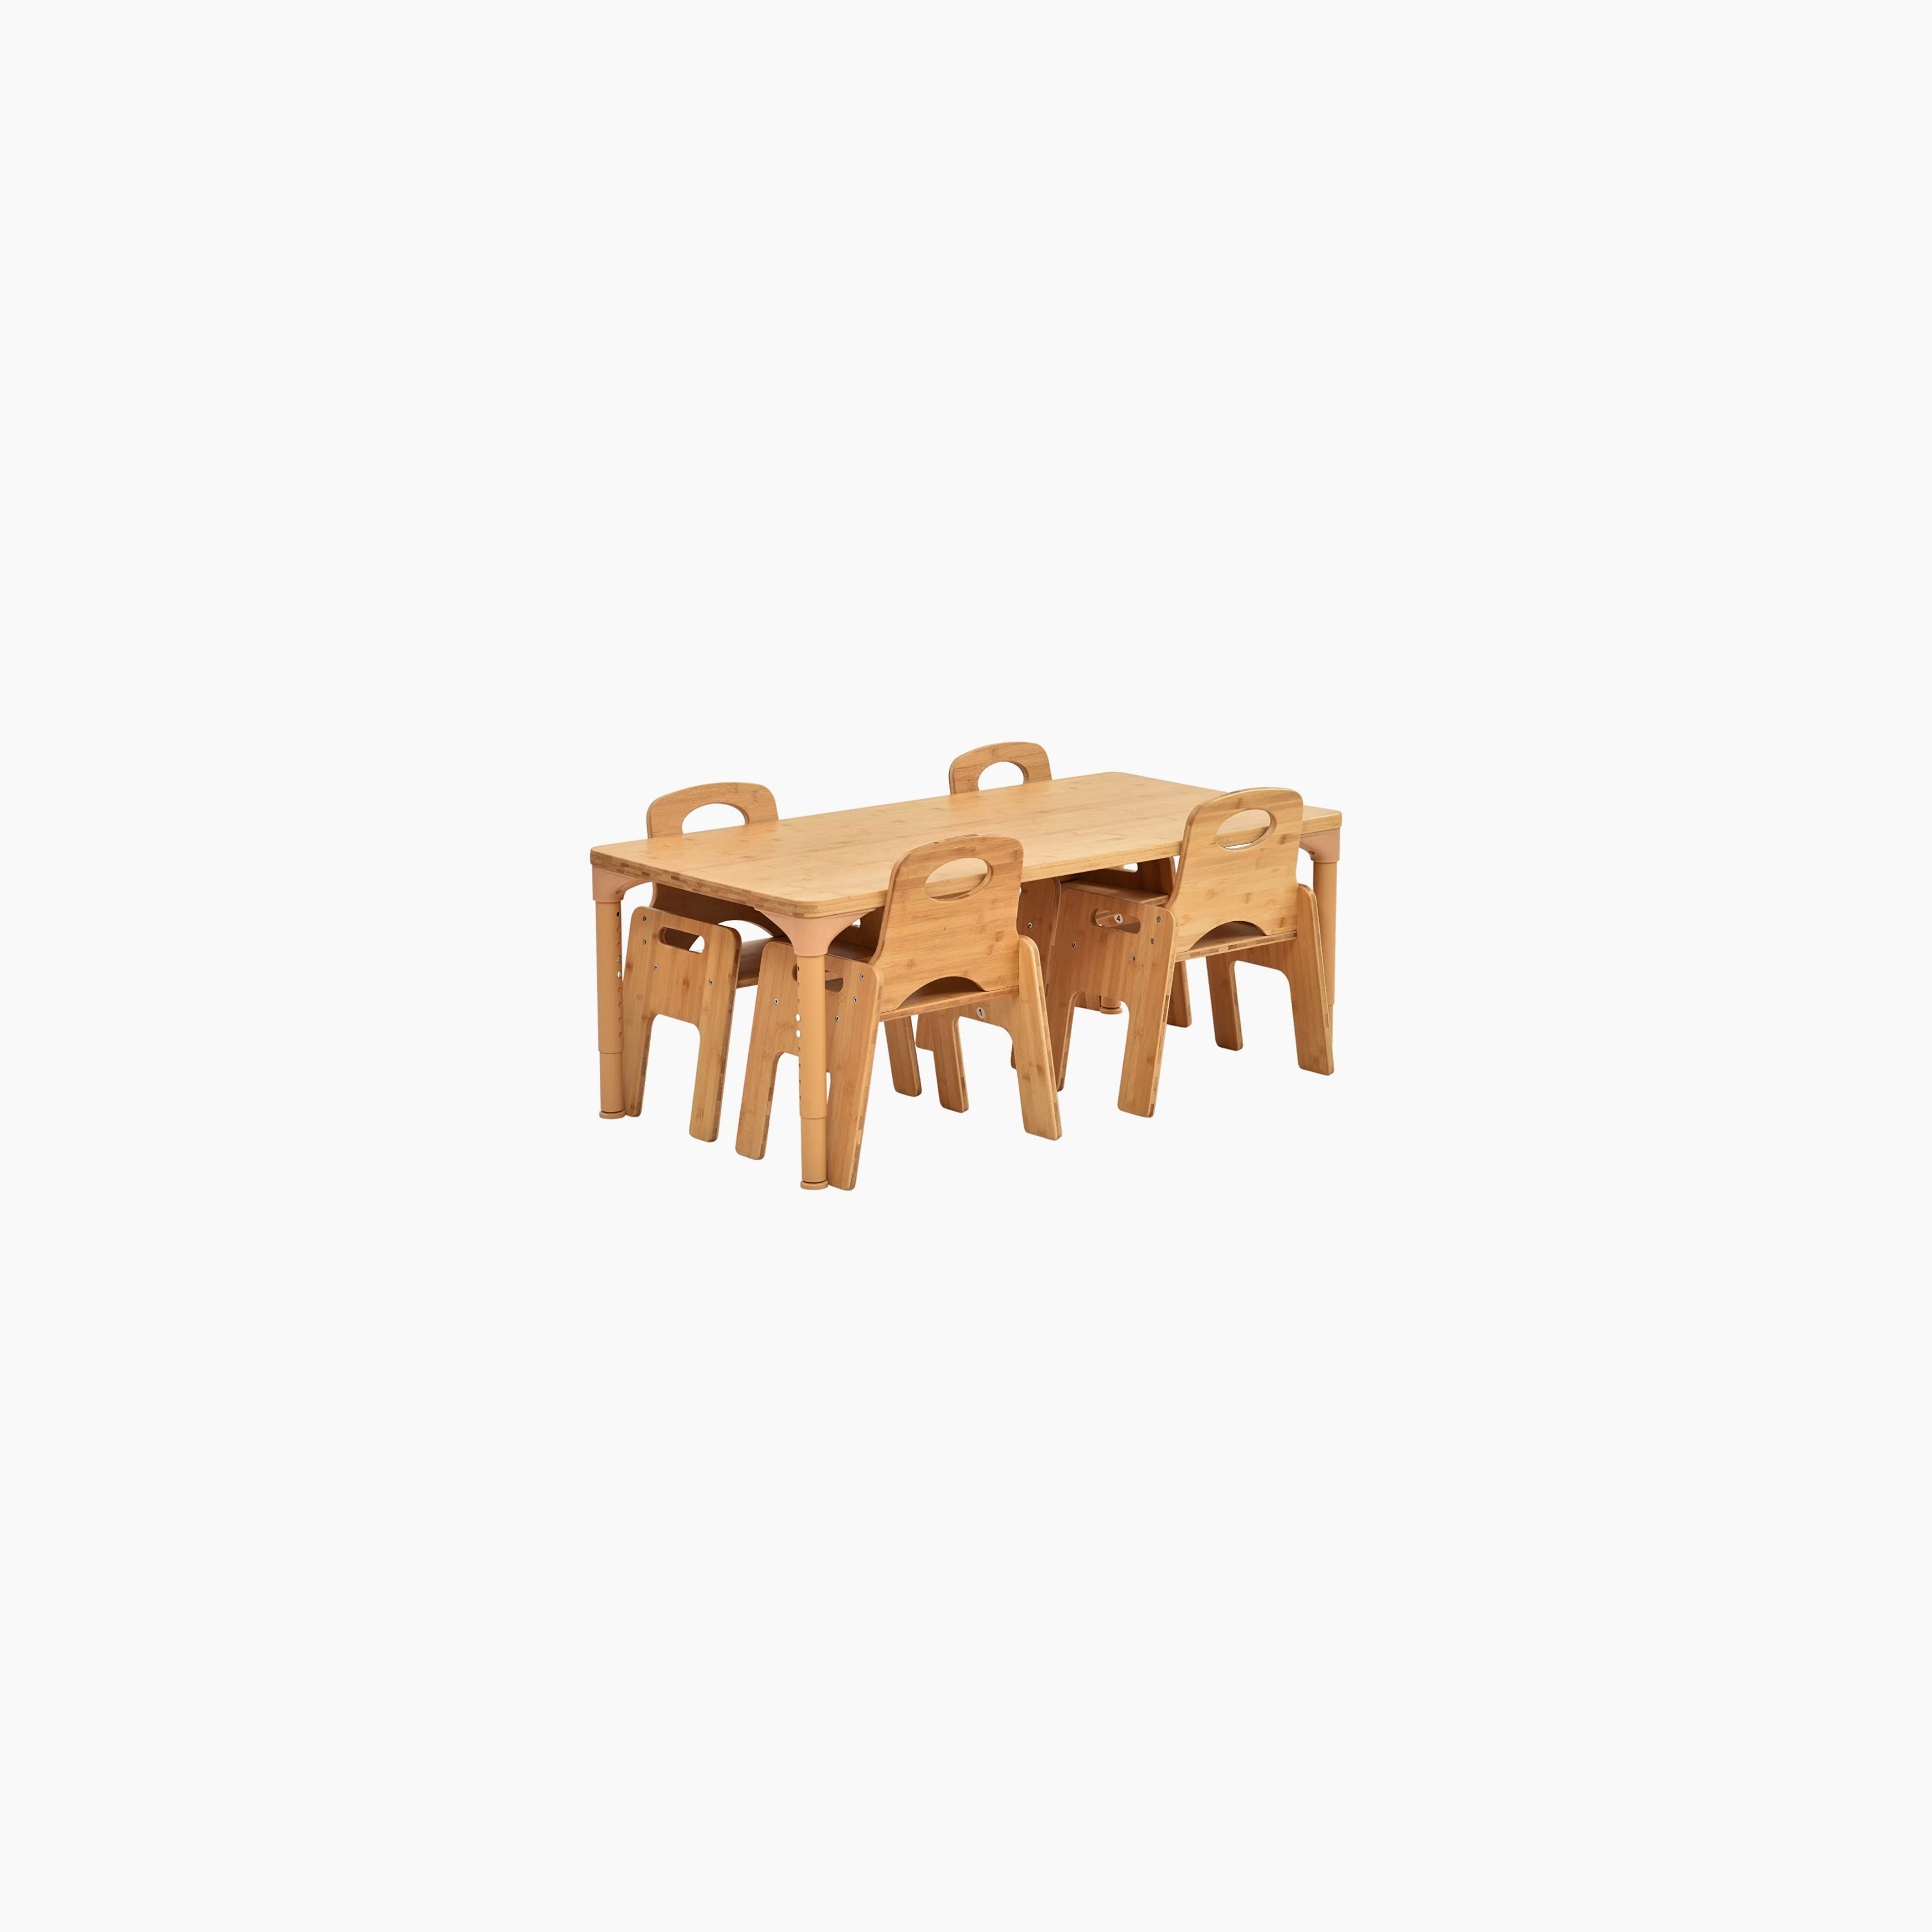 Adrian - Bamboo Toddler Table and Chair 5 Piece Set